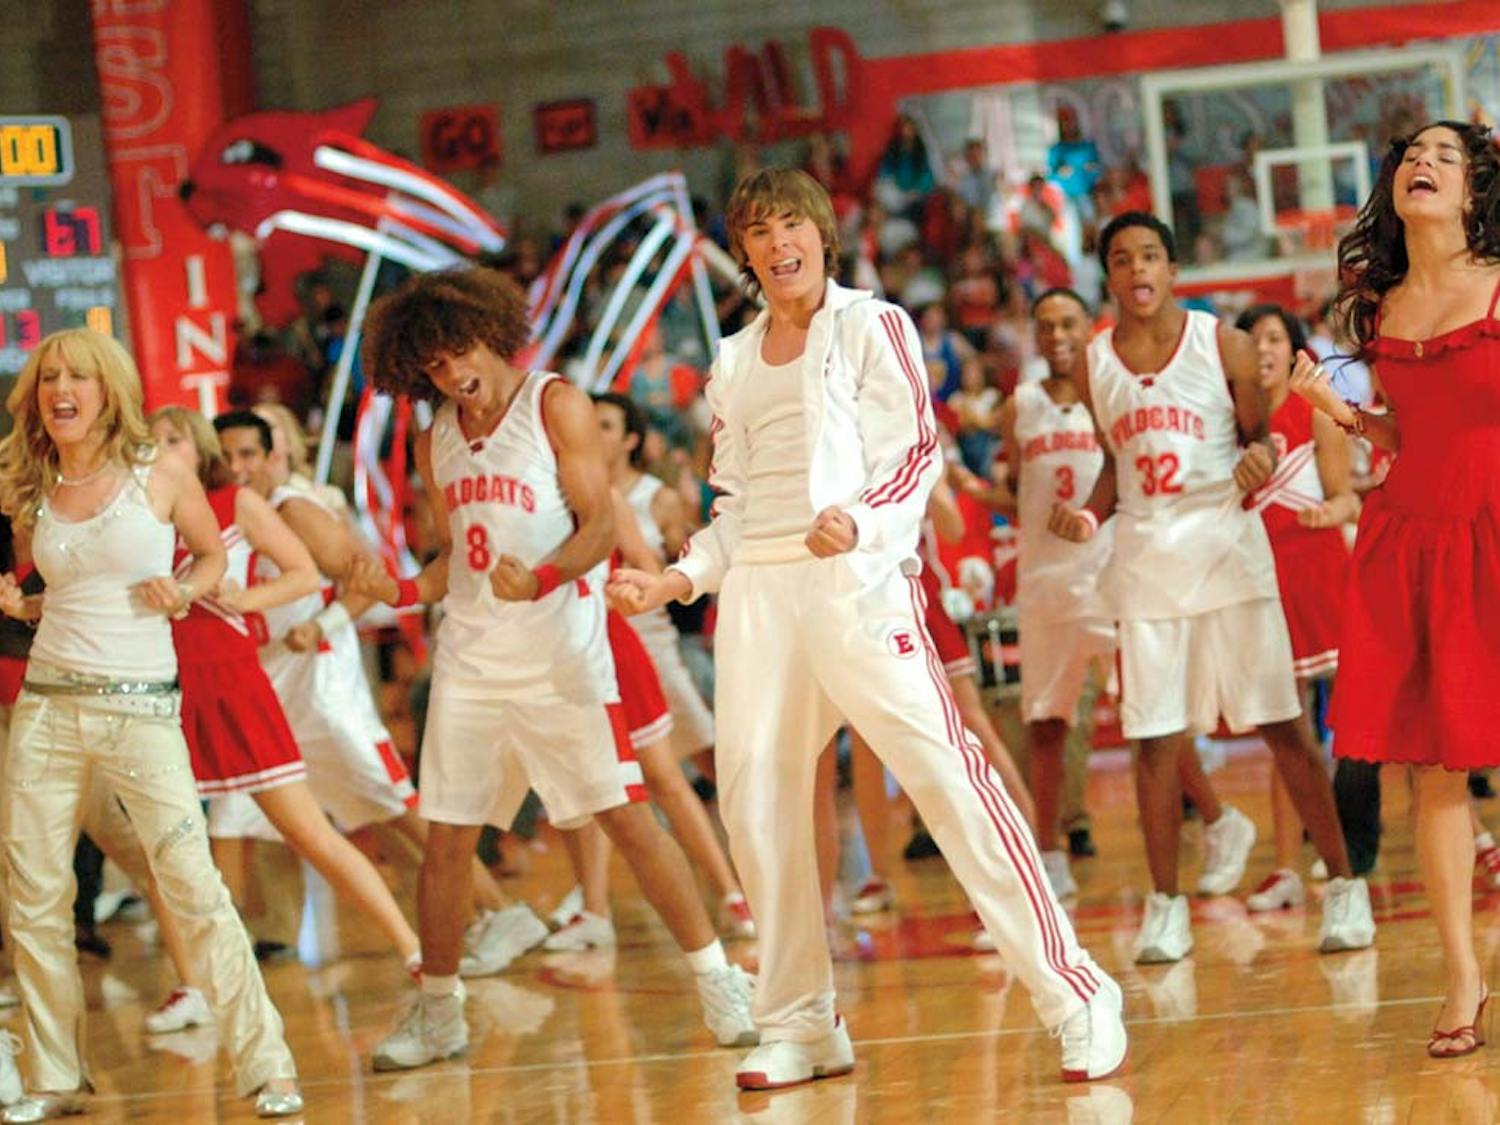 High School Musical debuted January 20, 2006 on Disney Channel.l 